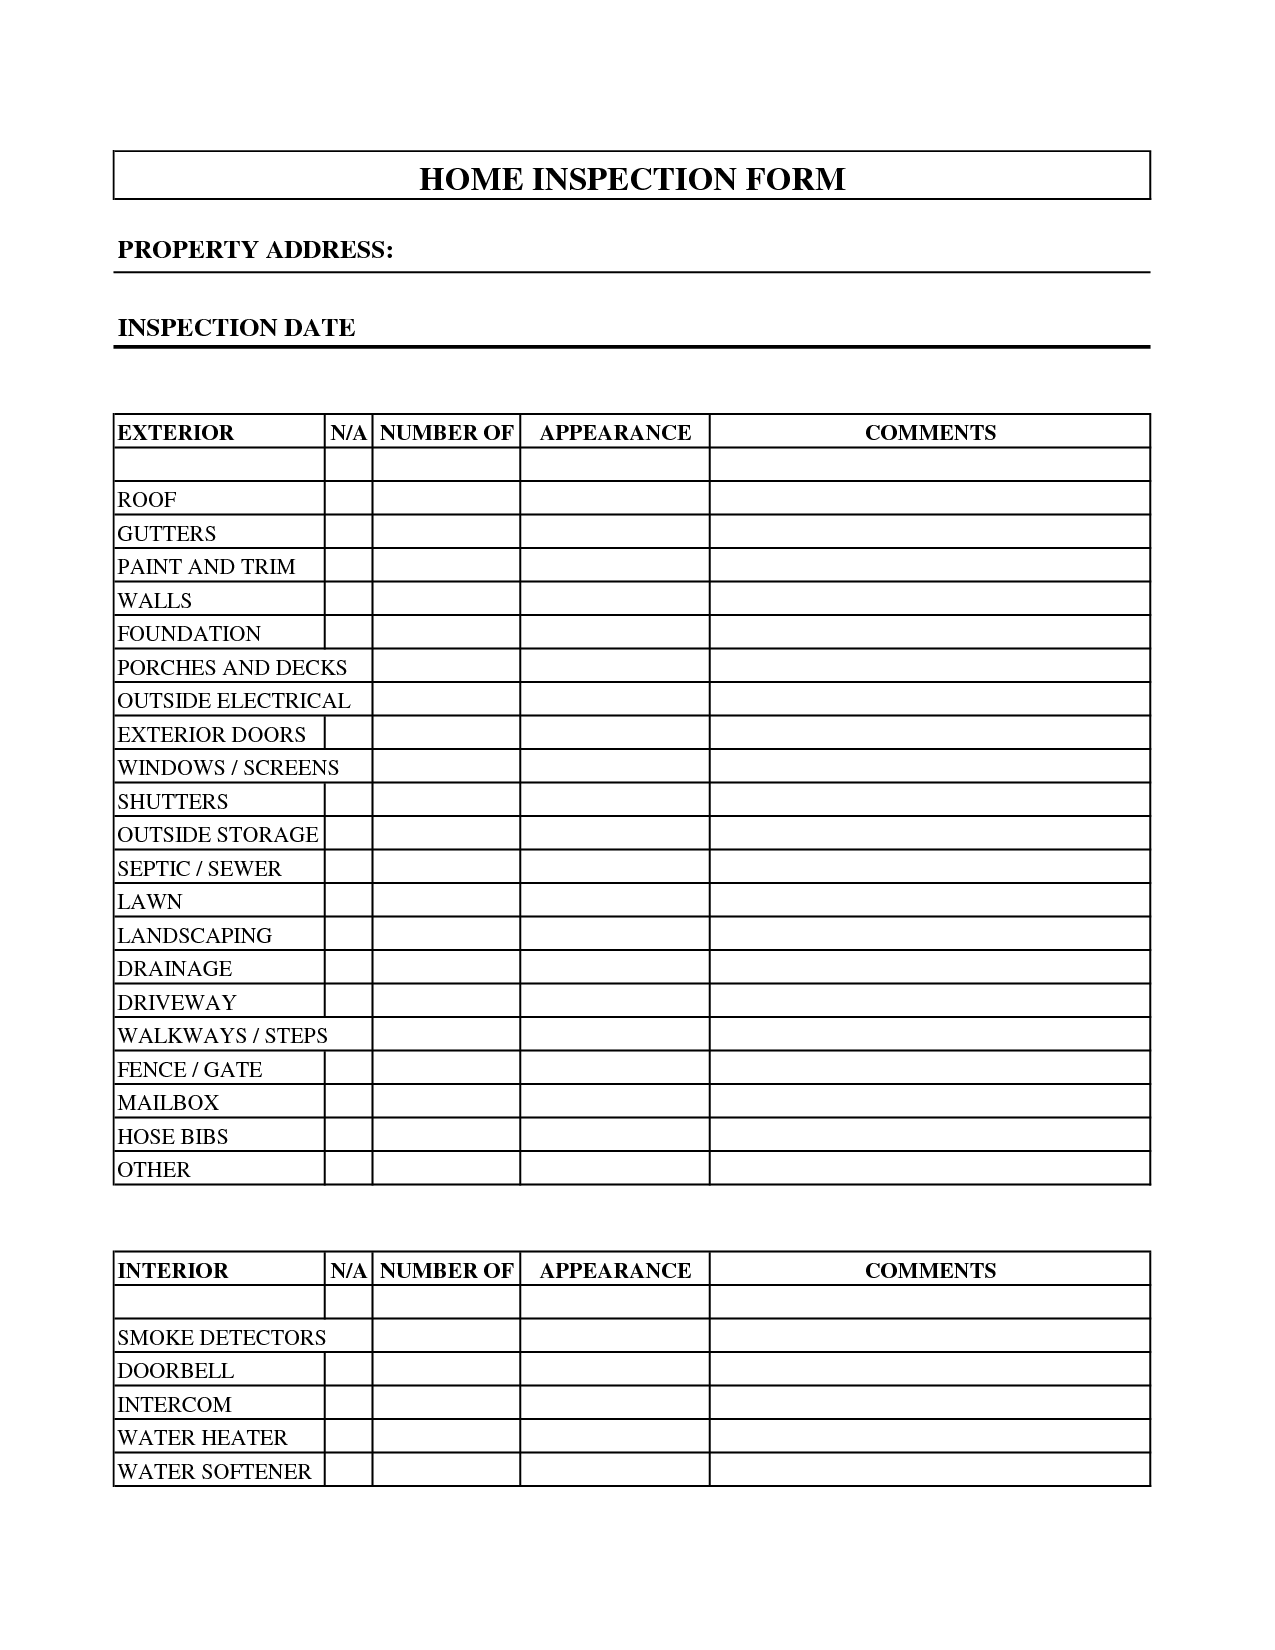 Blank Home Inspection Checklist Template Excel Within Home Inspection Checklist Template Excel Samples